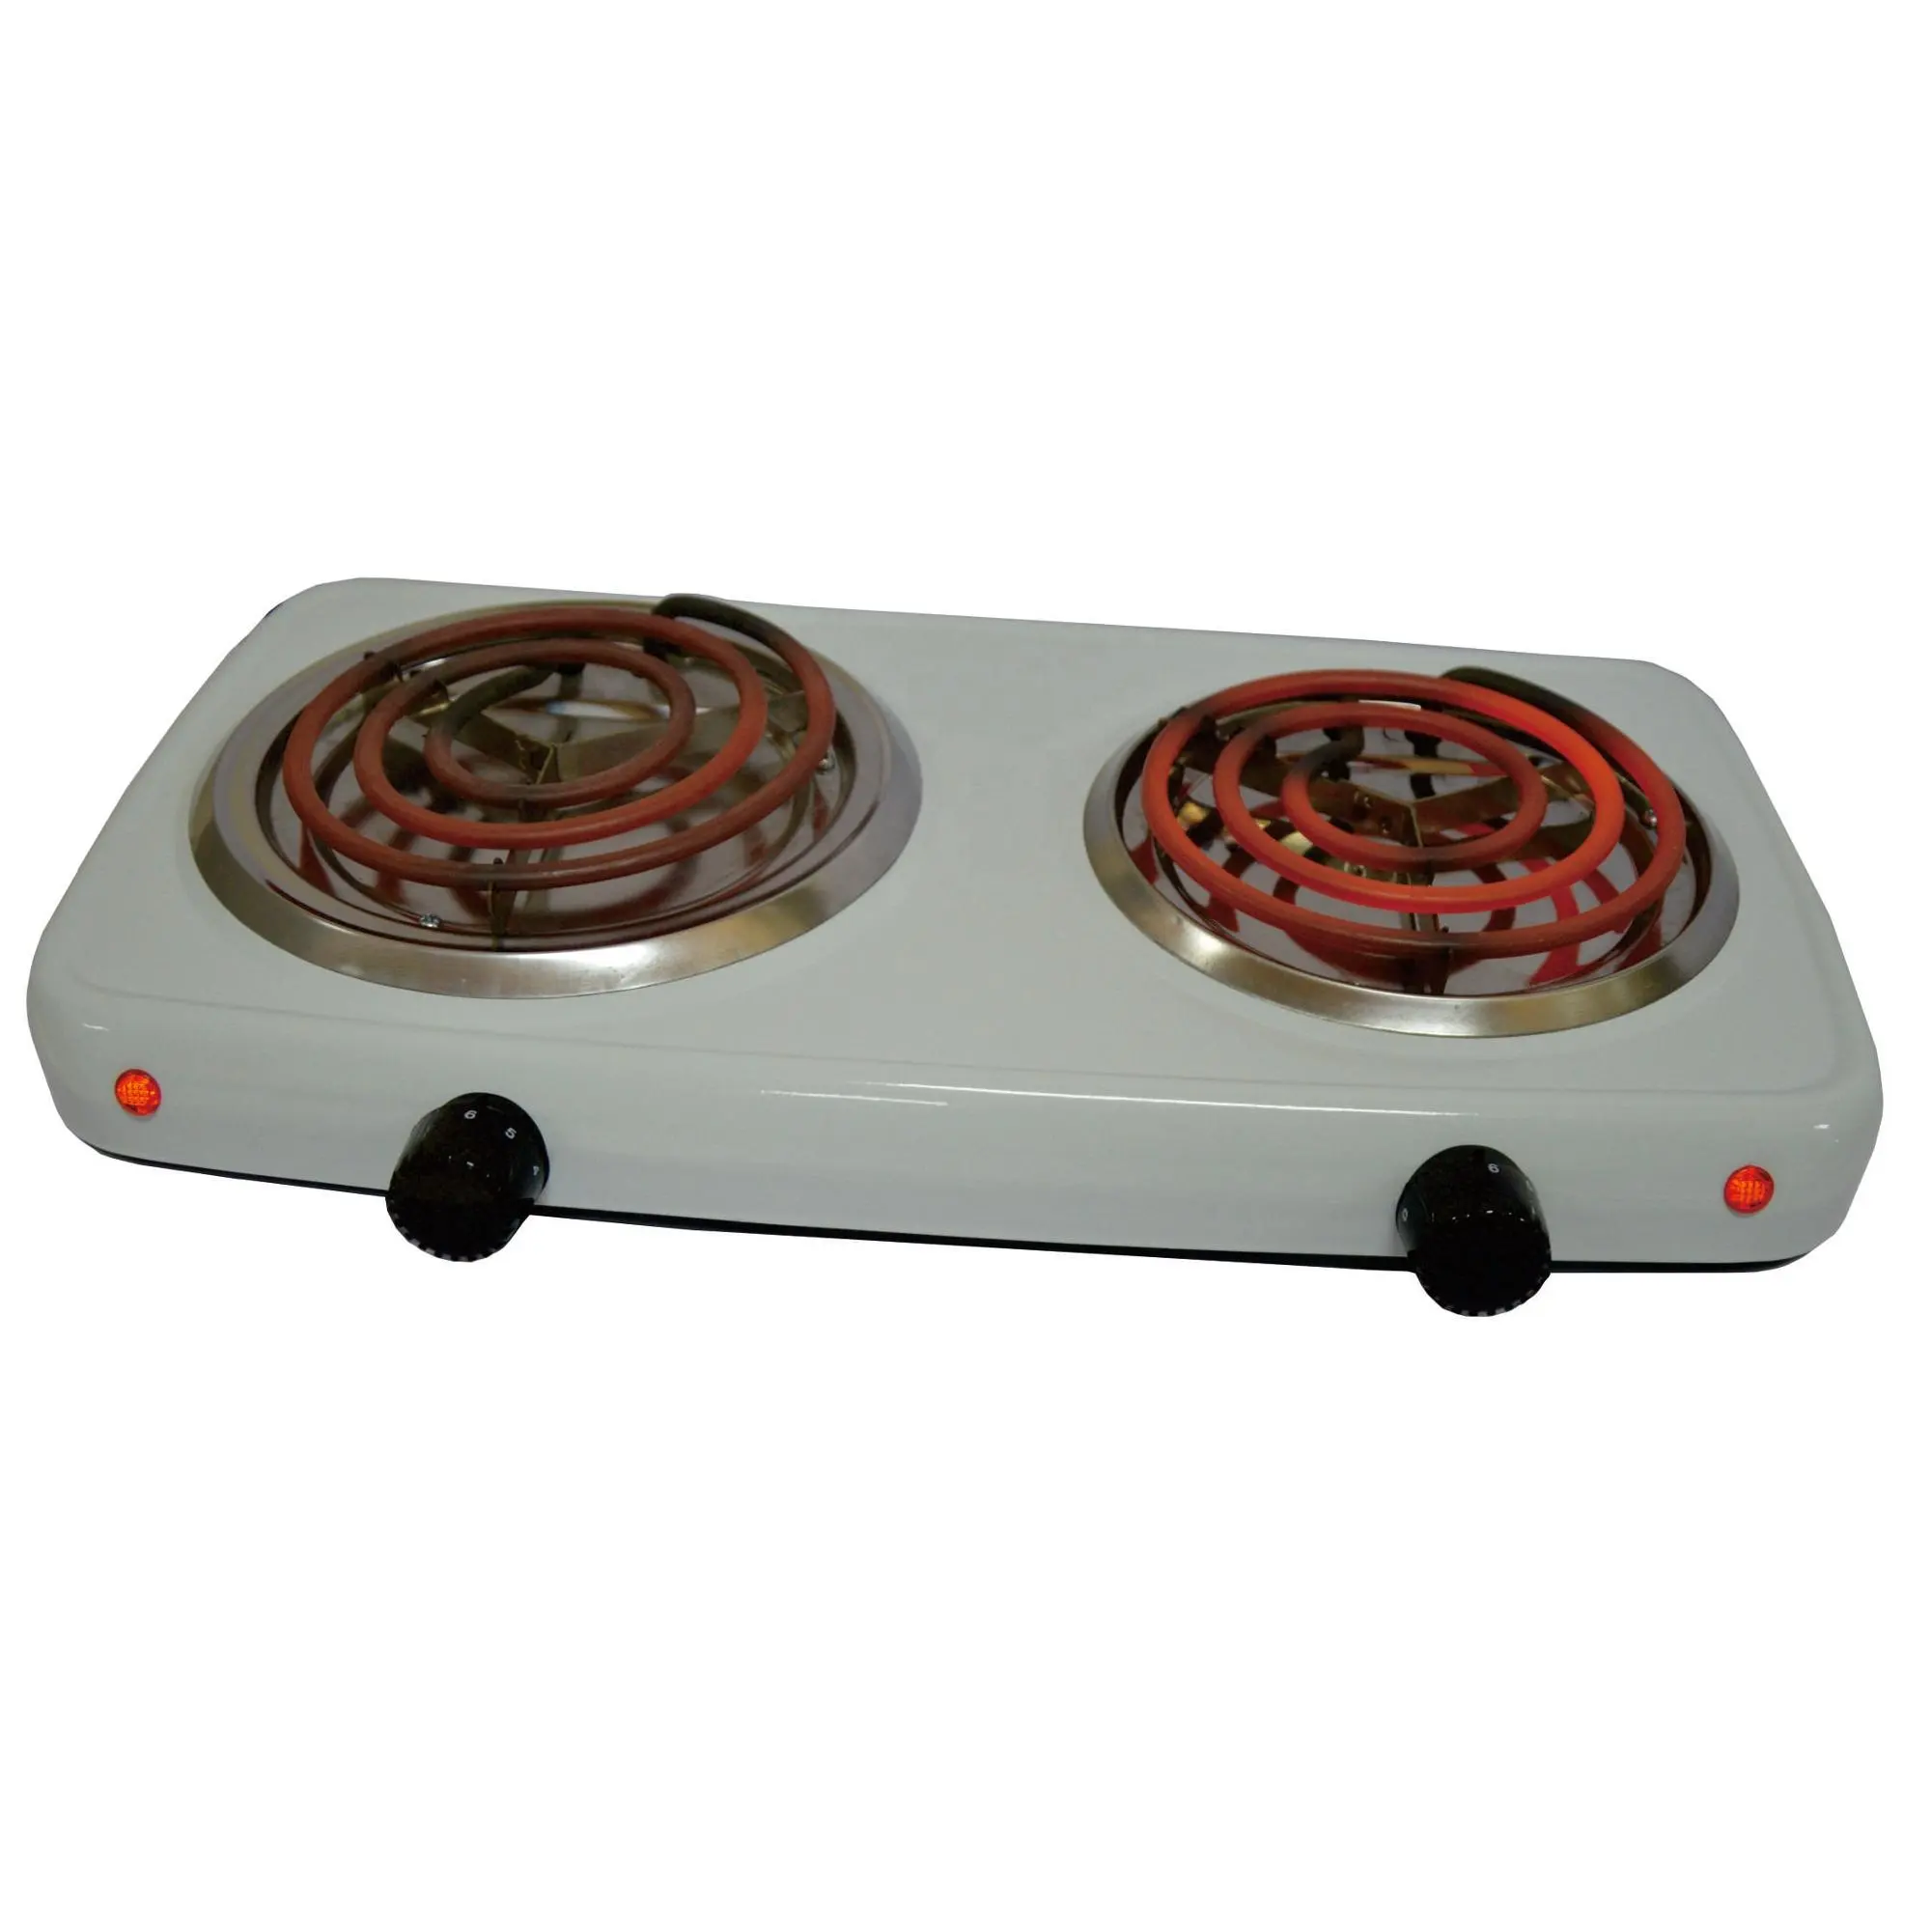 Hotplate Electric Double Burner Coil Spiral Tubes Good Electric Stove Hot Plate